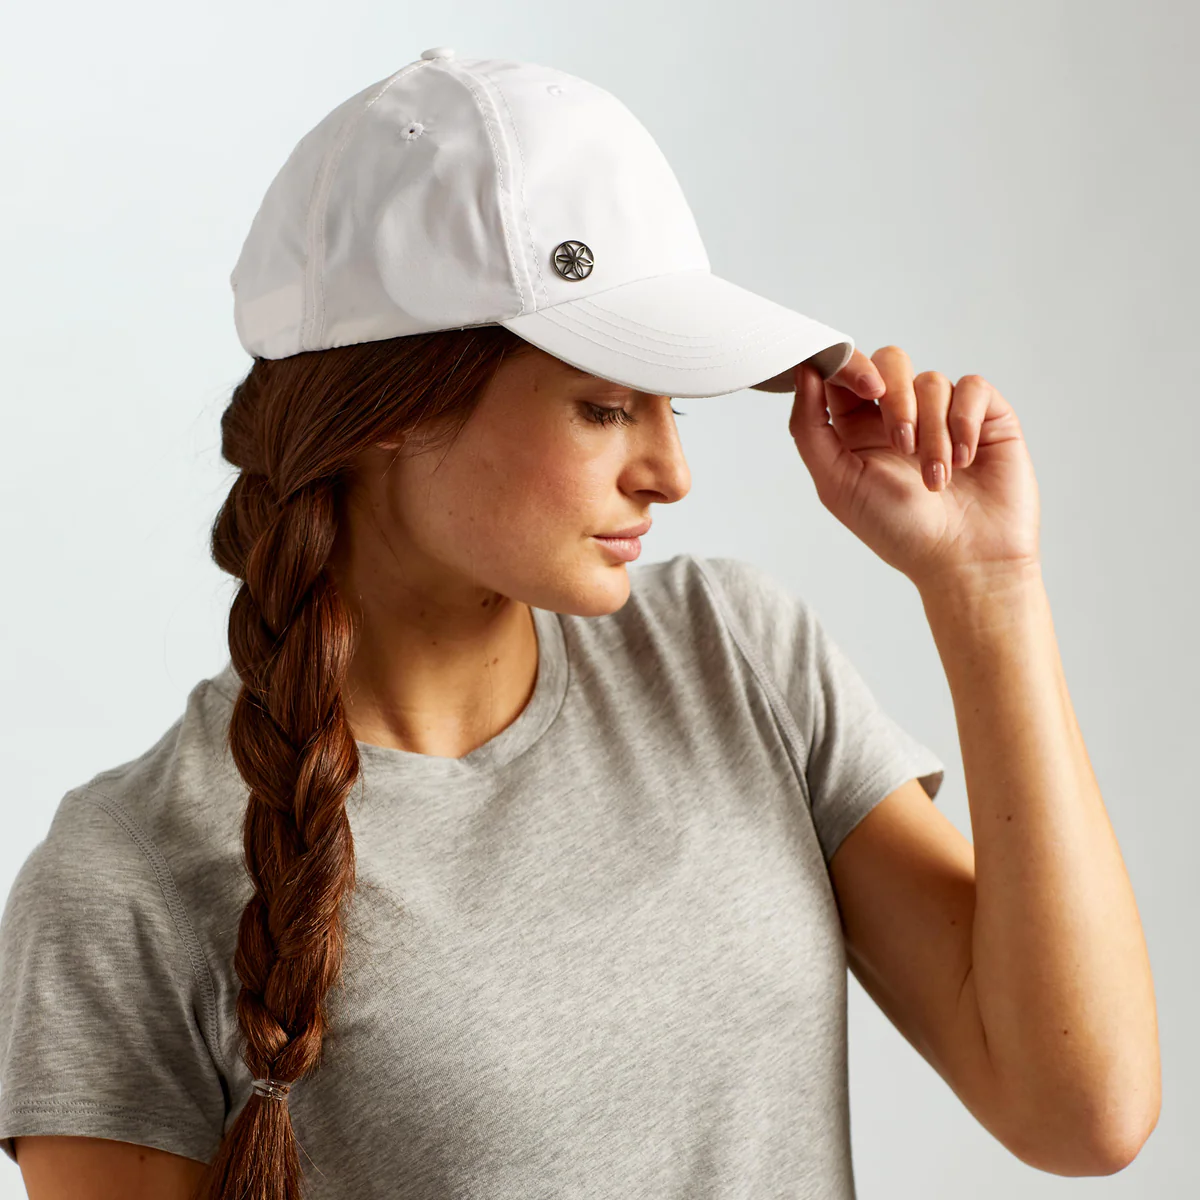 GAIAM</p>
<p>CLASSIC SOLARA UV PROTECTION FITNESS HAT. White with model wearing cap 